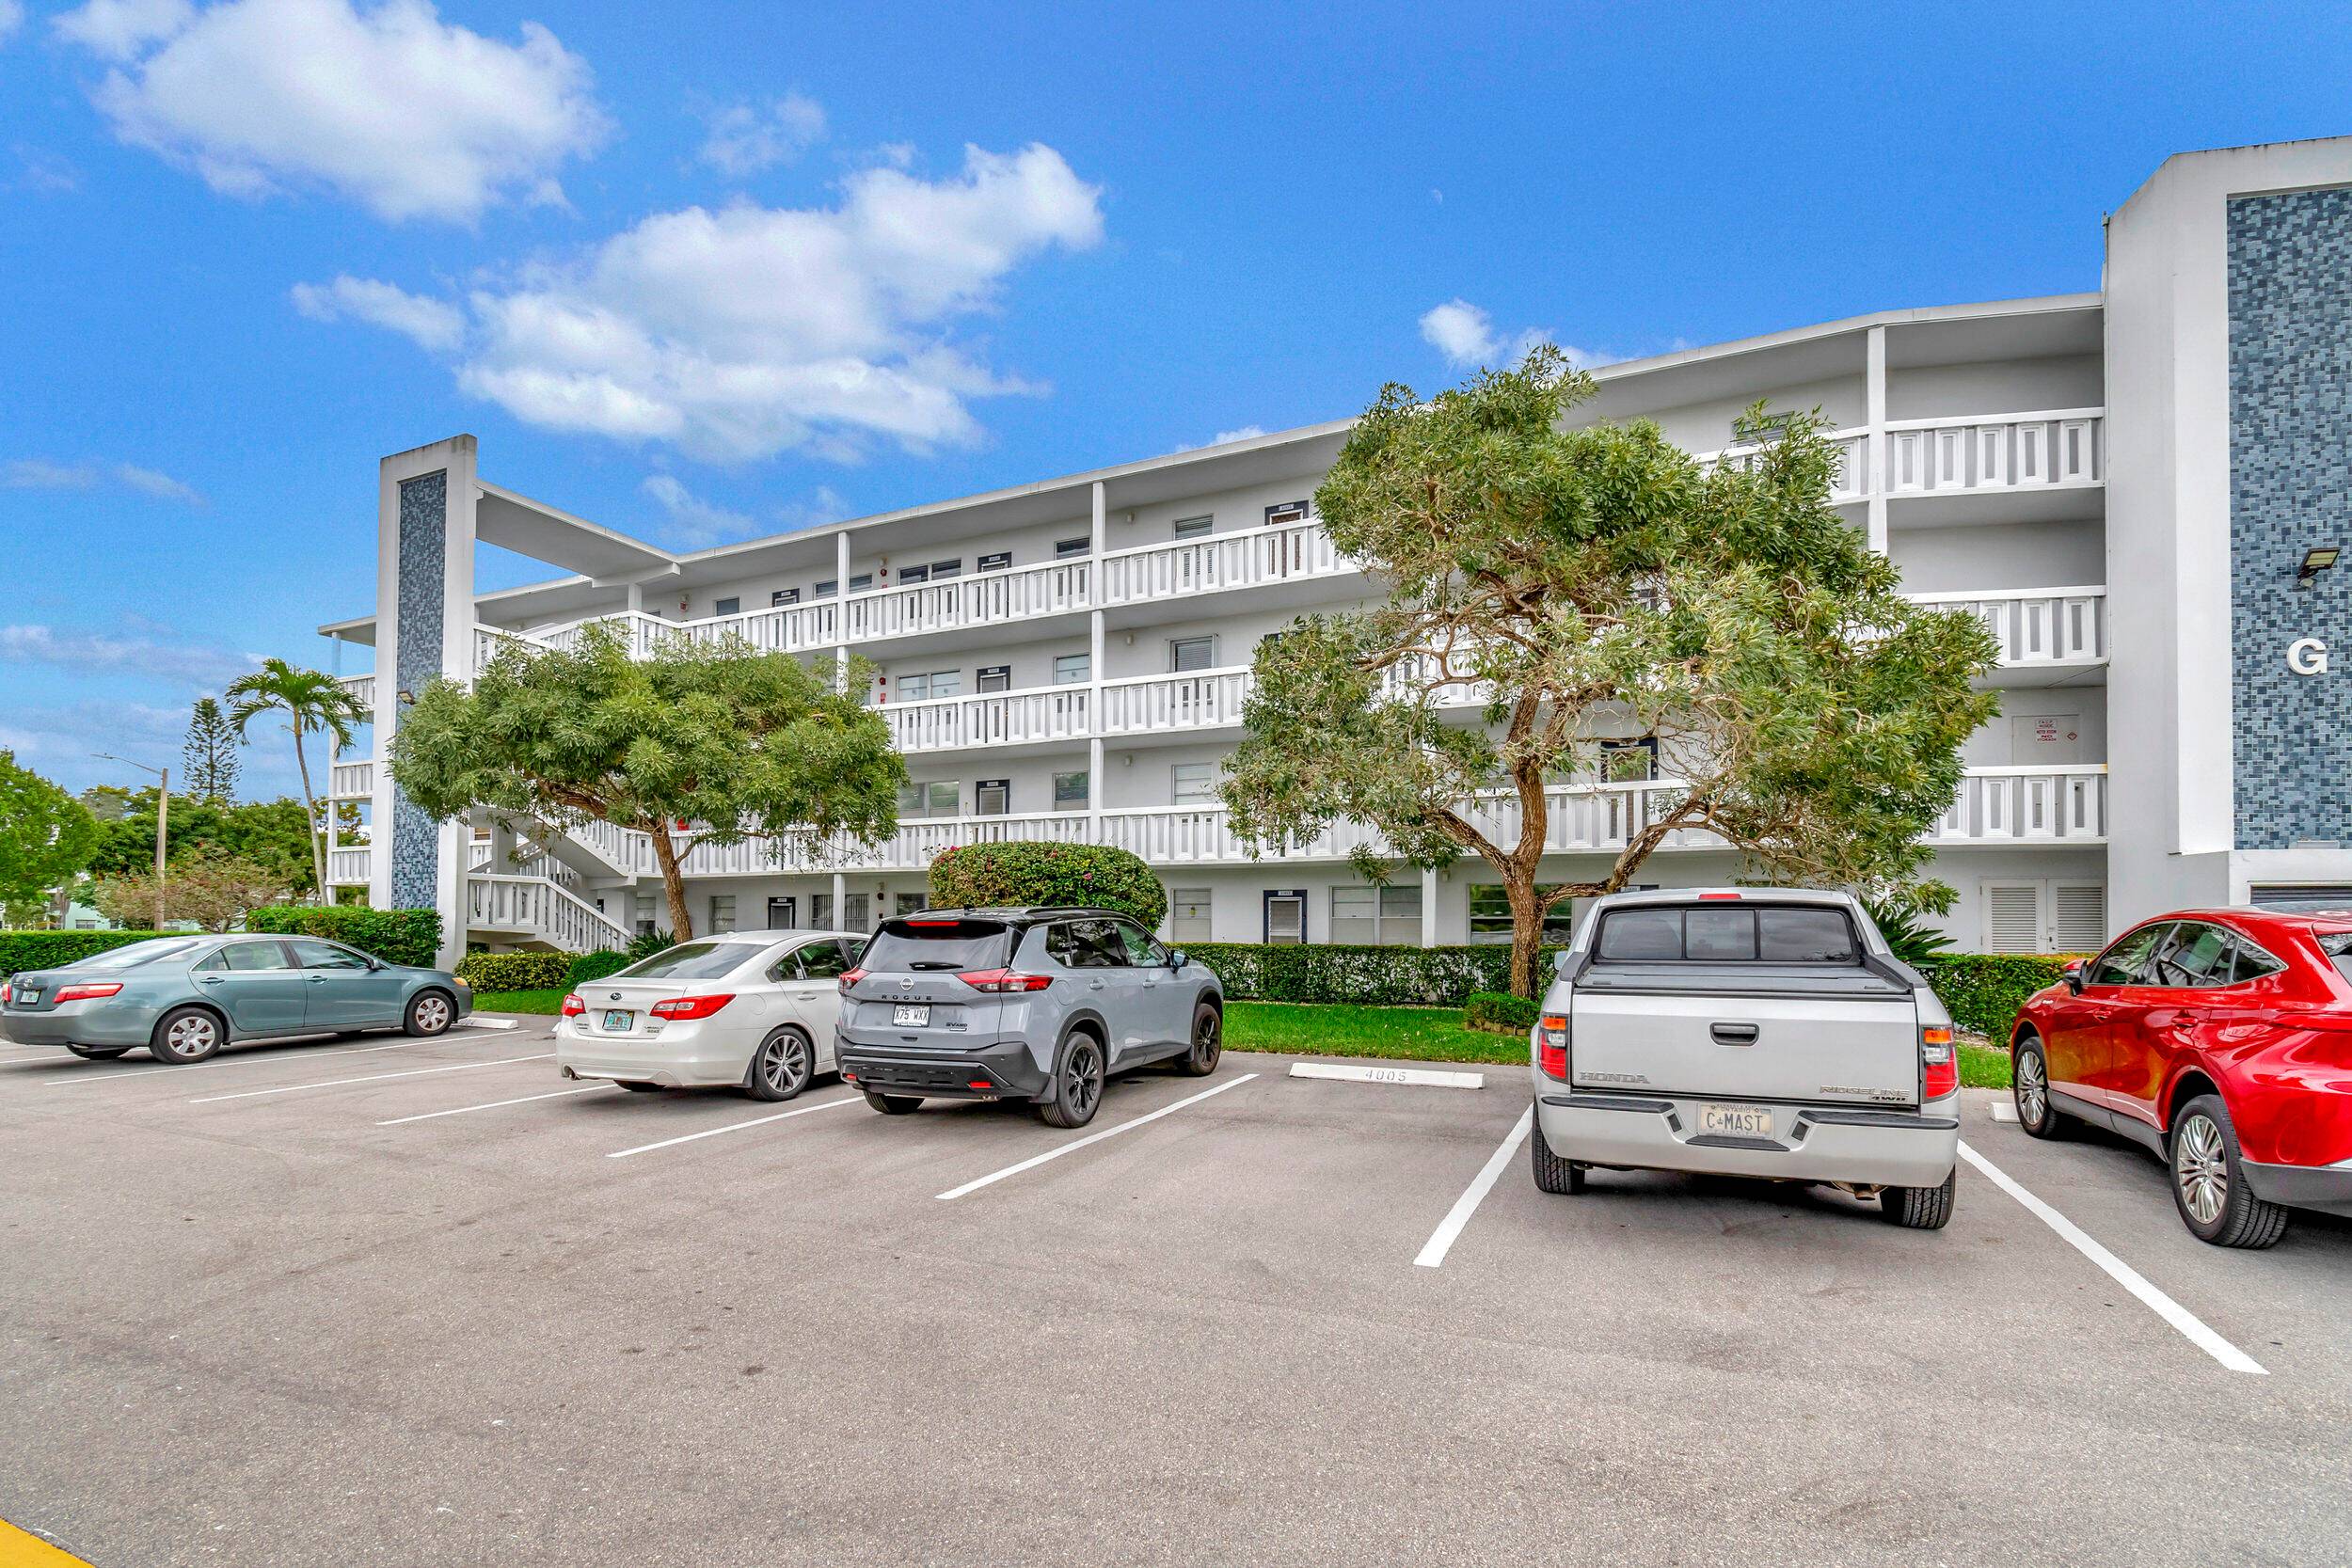 Experience retirement living at its finest in this NEWLY RENOVATED 2BR 2BA condo in the GATED COMMUNITY of Century Village.